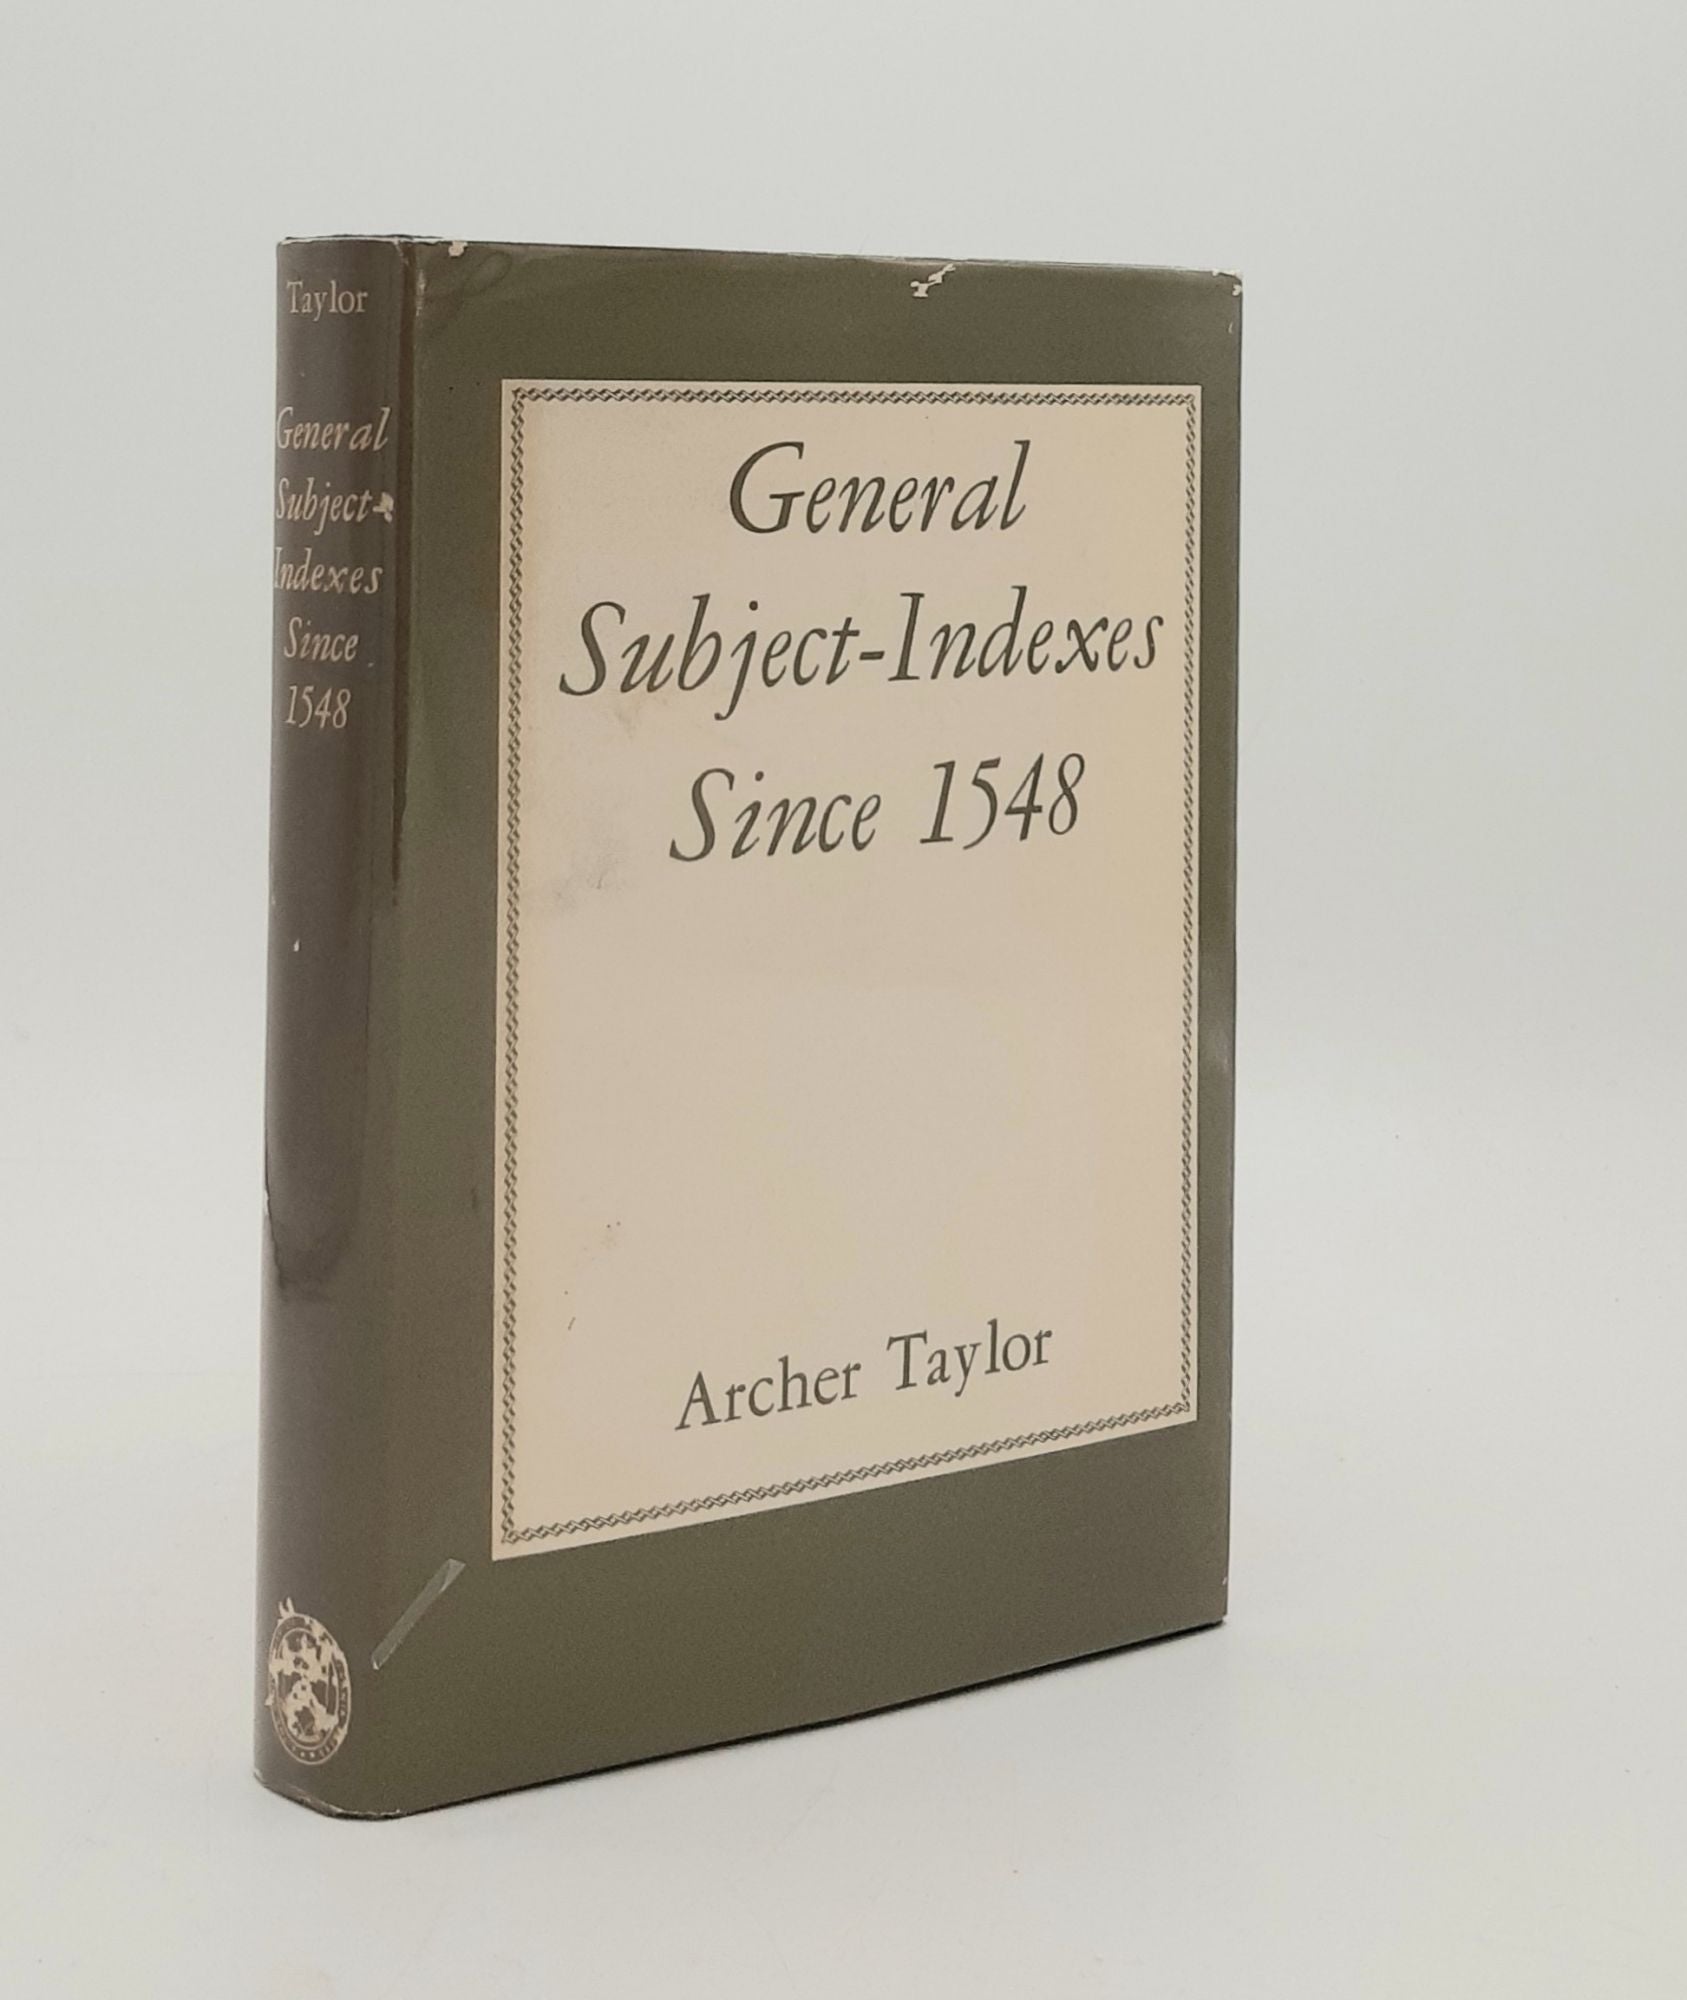 TAYLOR Archer - General Subject Indexes Since 1548